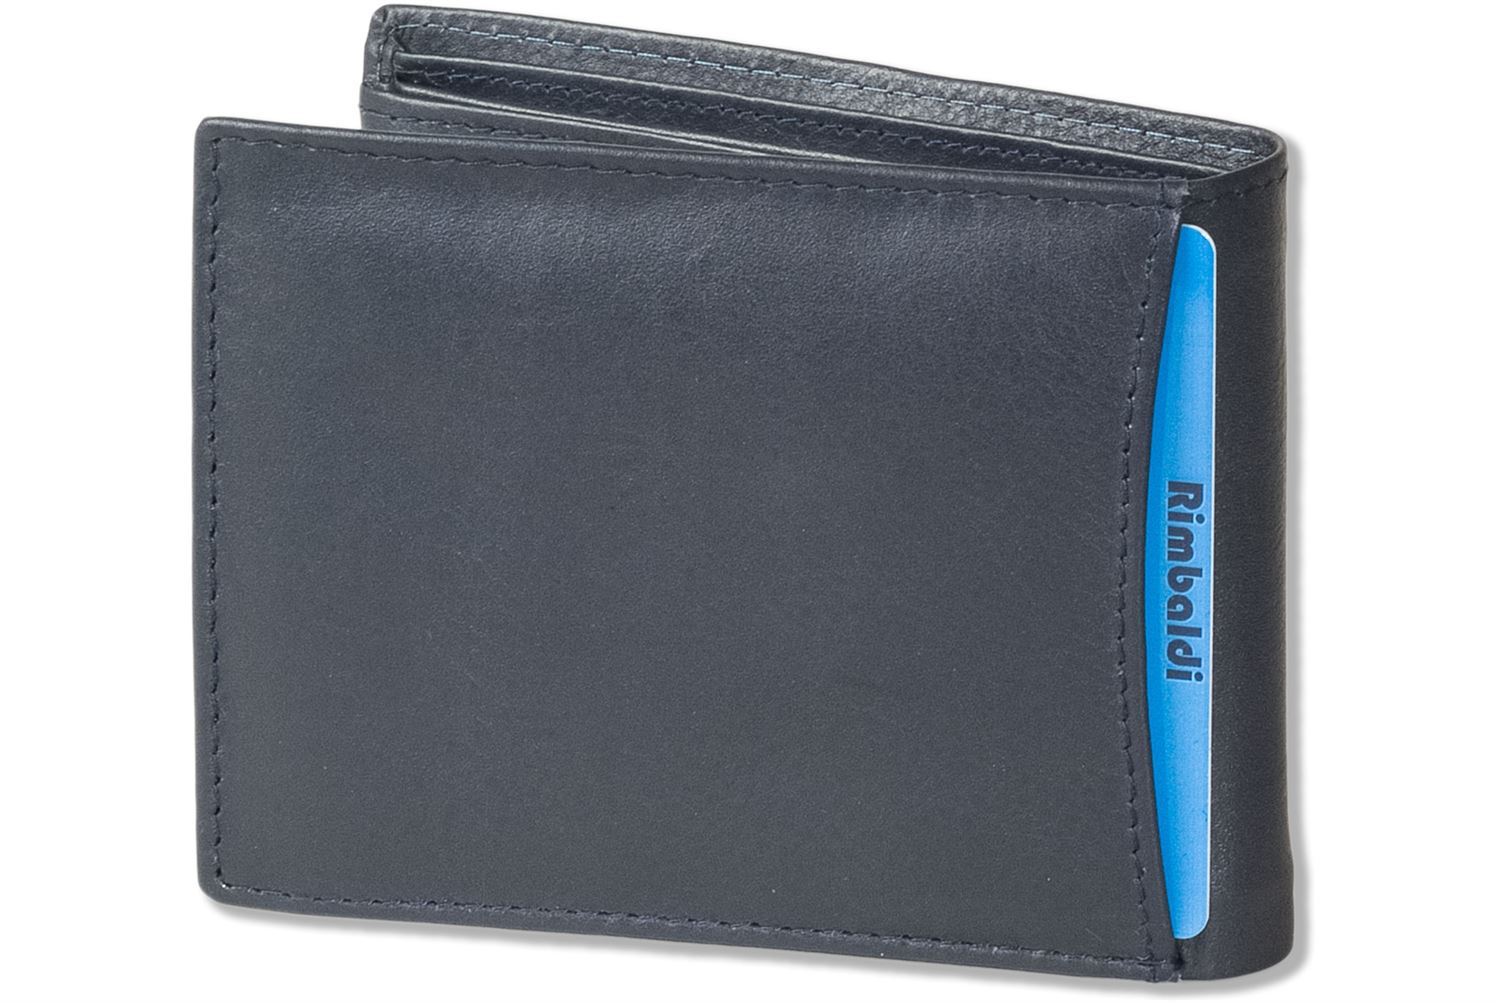 Rimbaldi Cross Format Wallet Made Of Soft Cowhide Nappa Leather